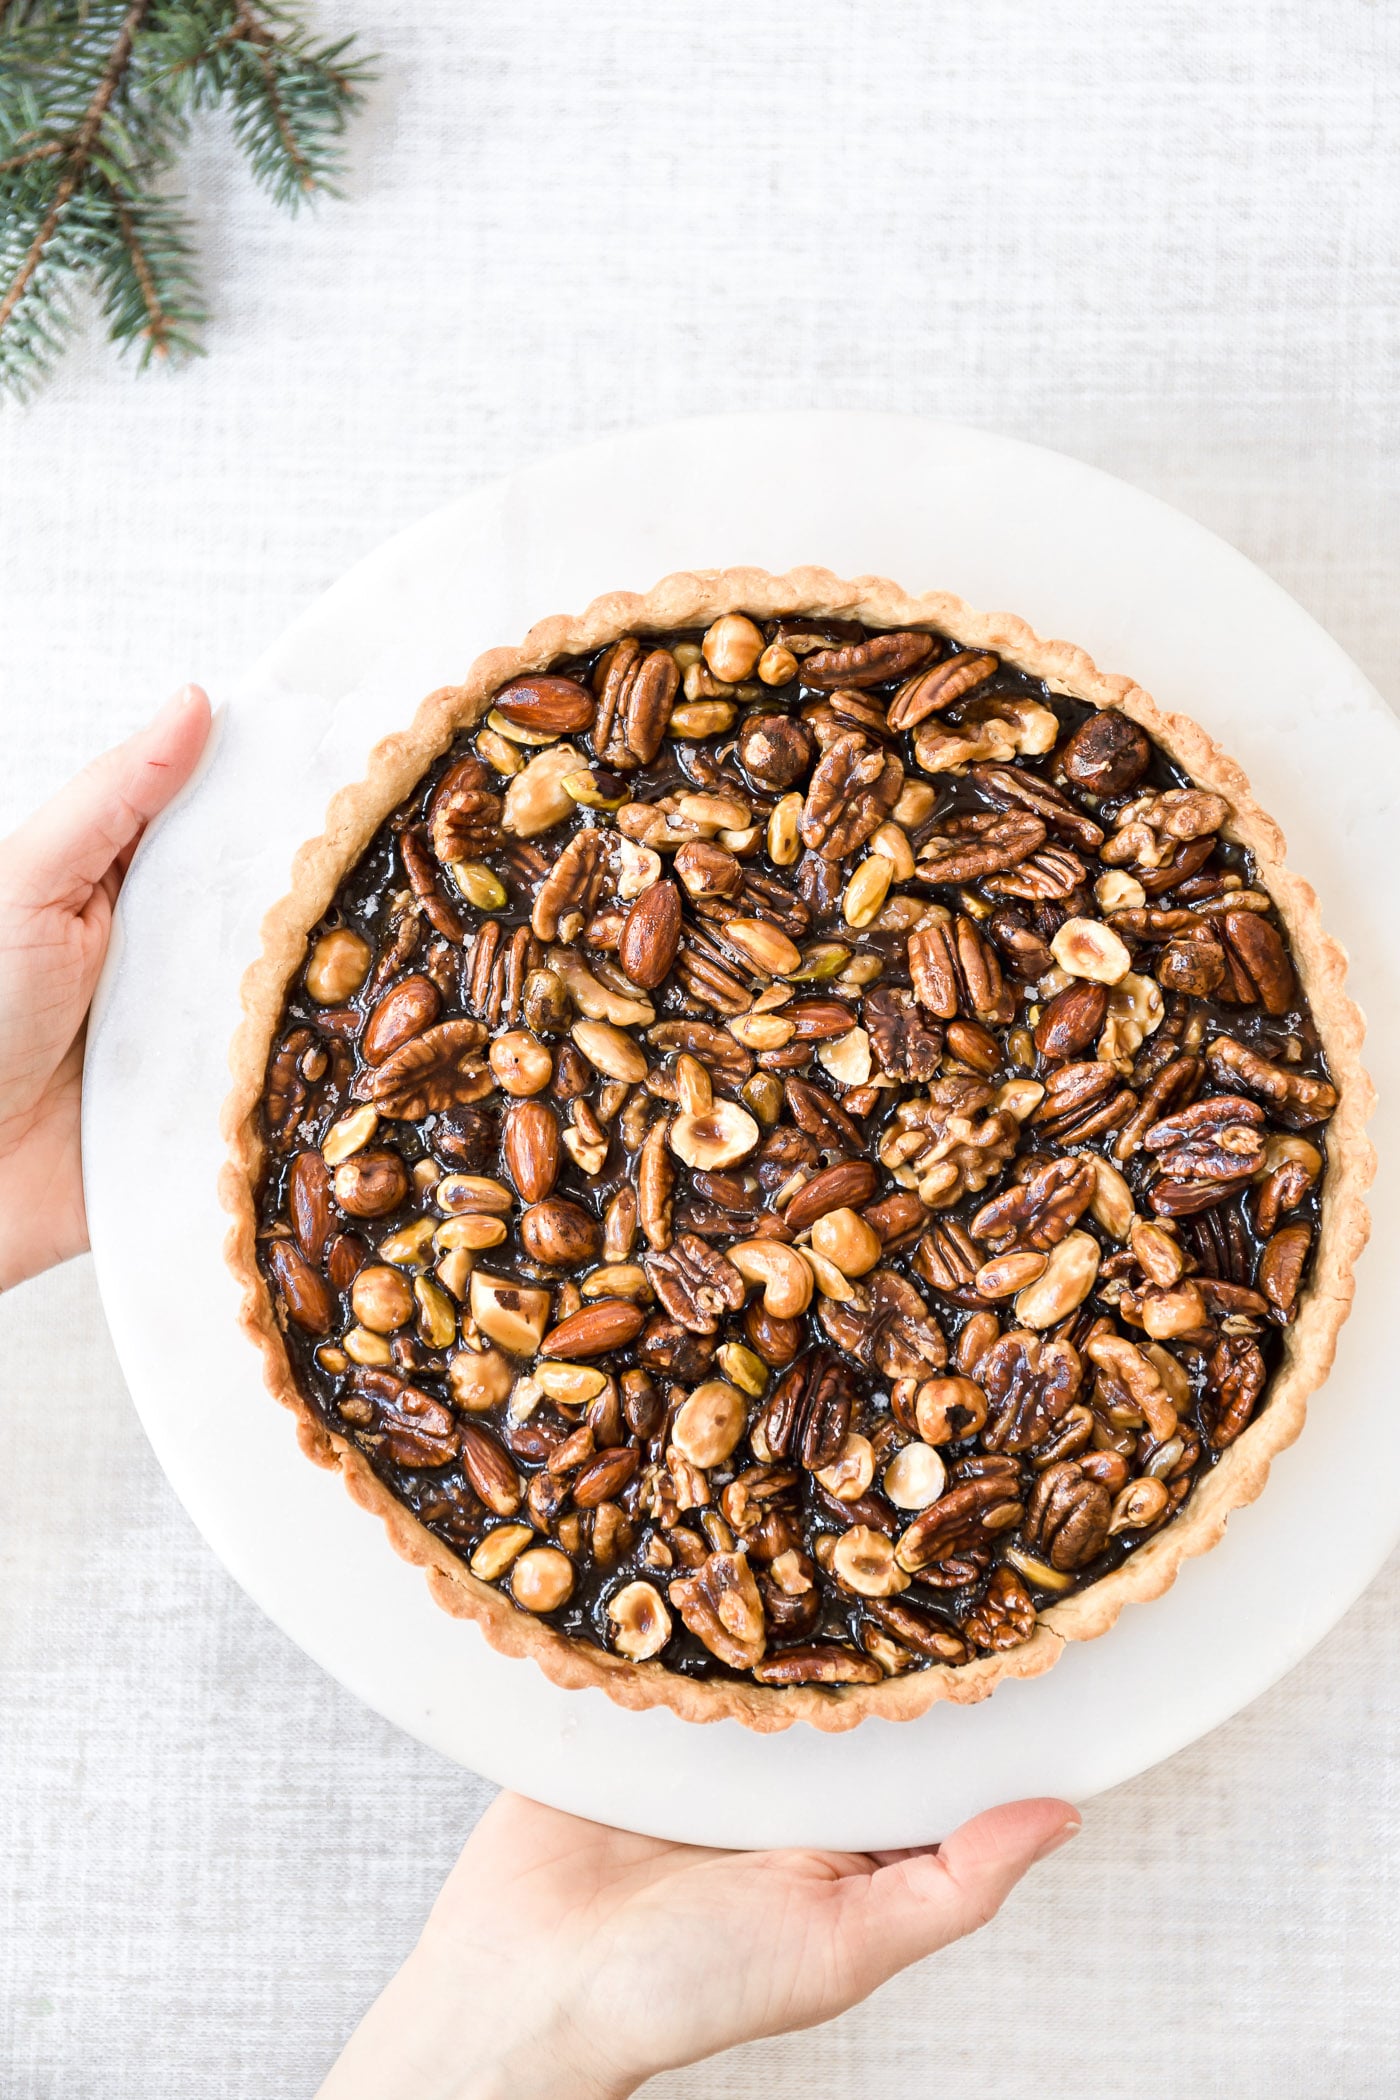 Freshly baked Caramel Nut Tart right out of the oven.